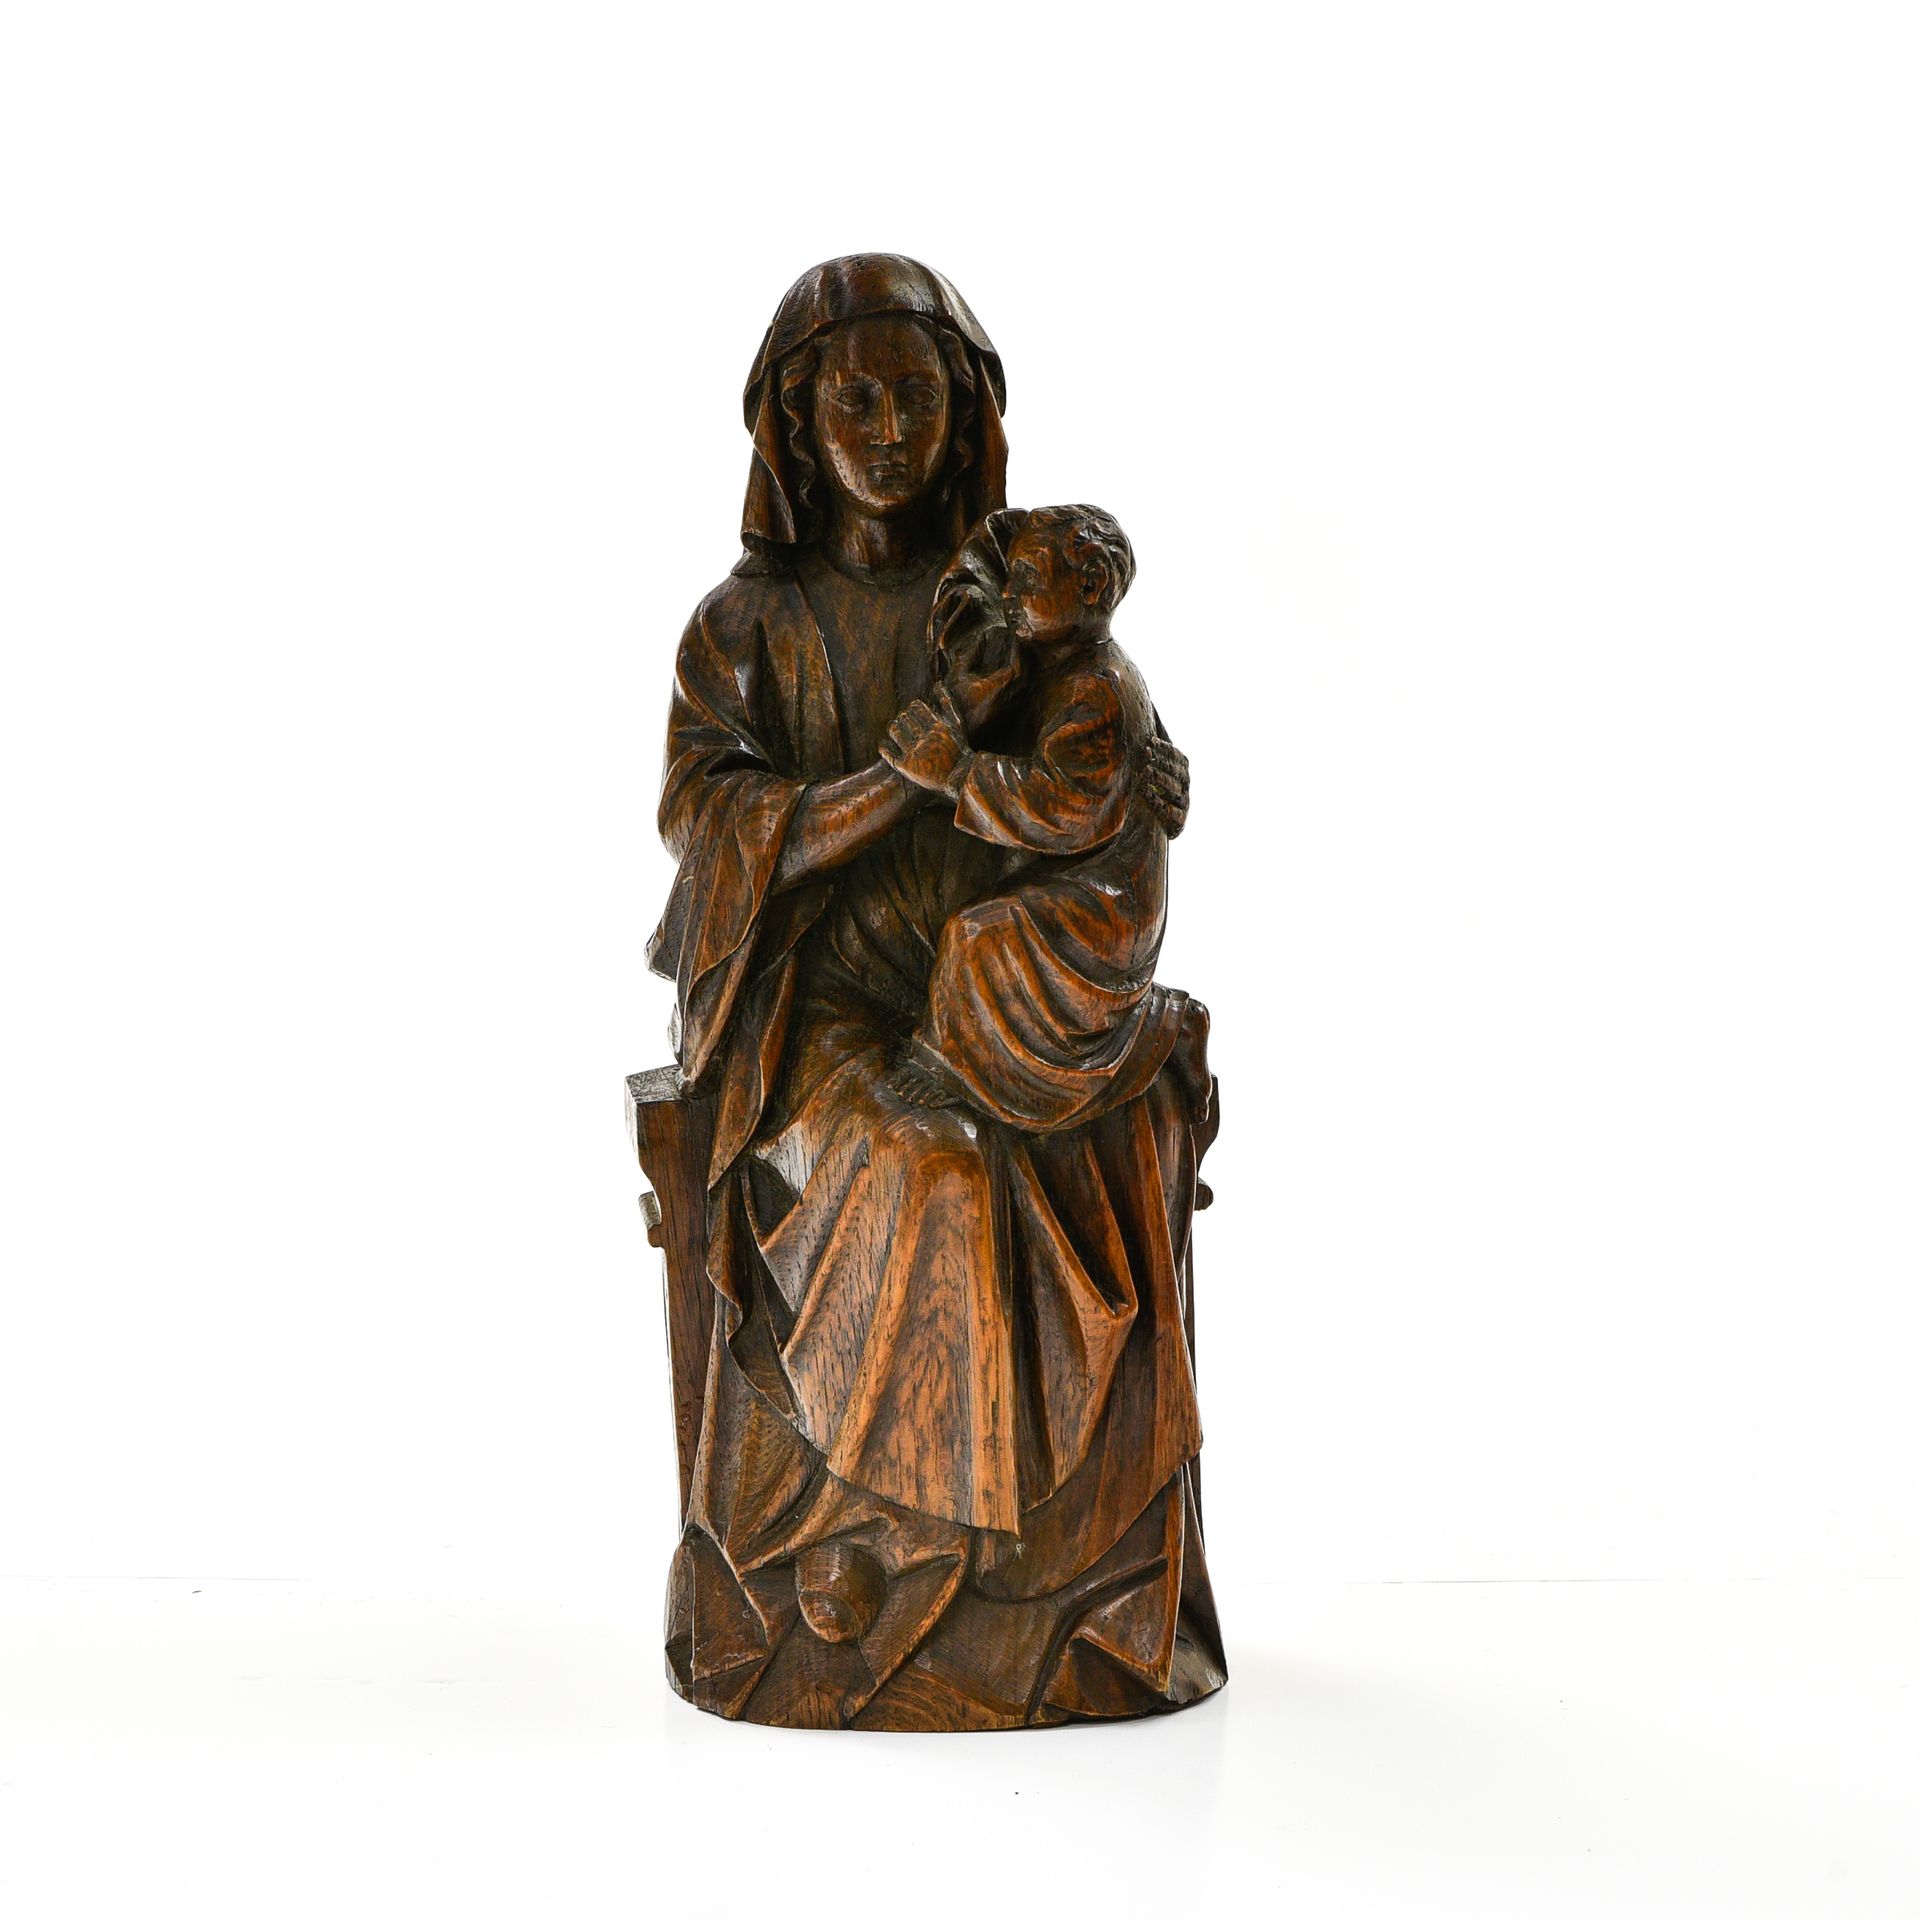 Null Seated Madonna and Child

19TH CENTURY, MEDIEVAL STYLE

Ronde-bosse carved &hellip;